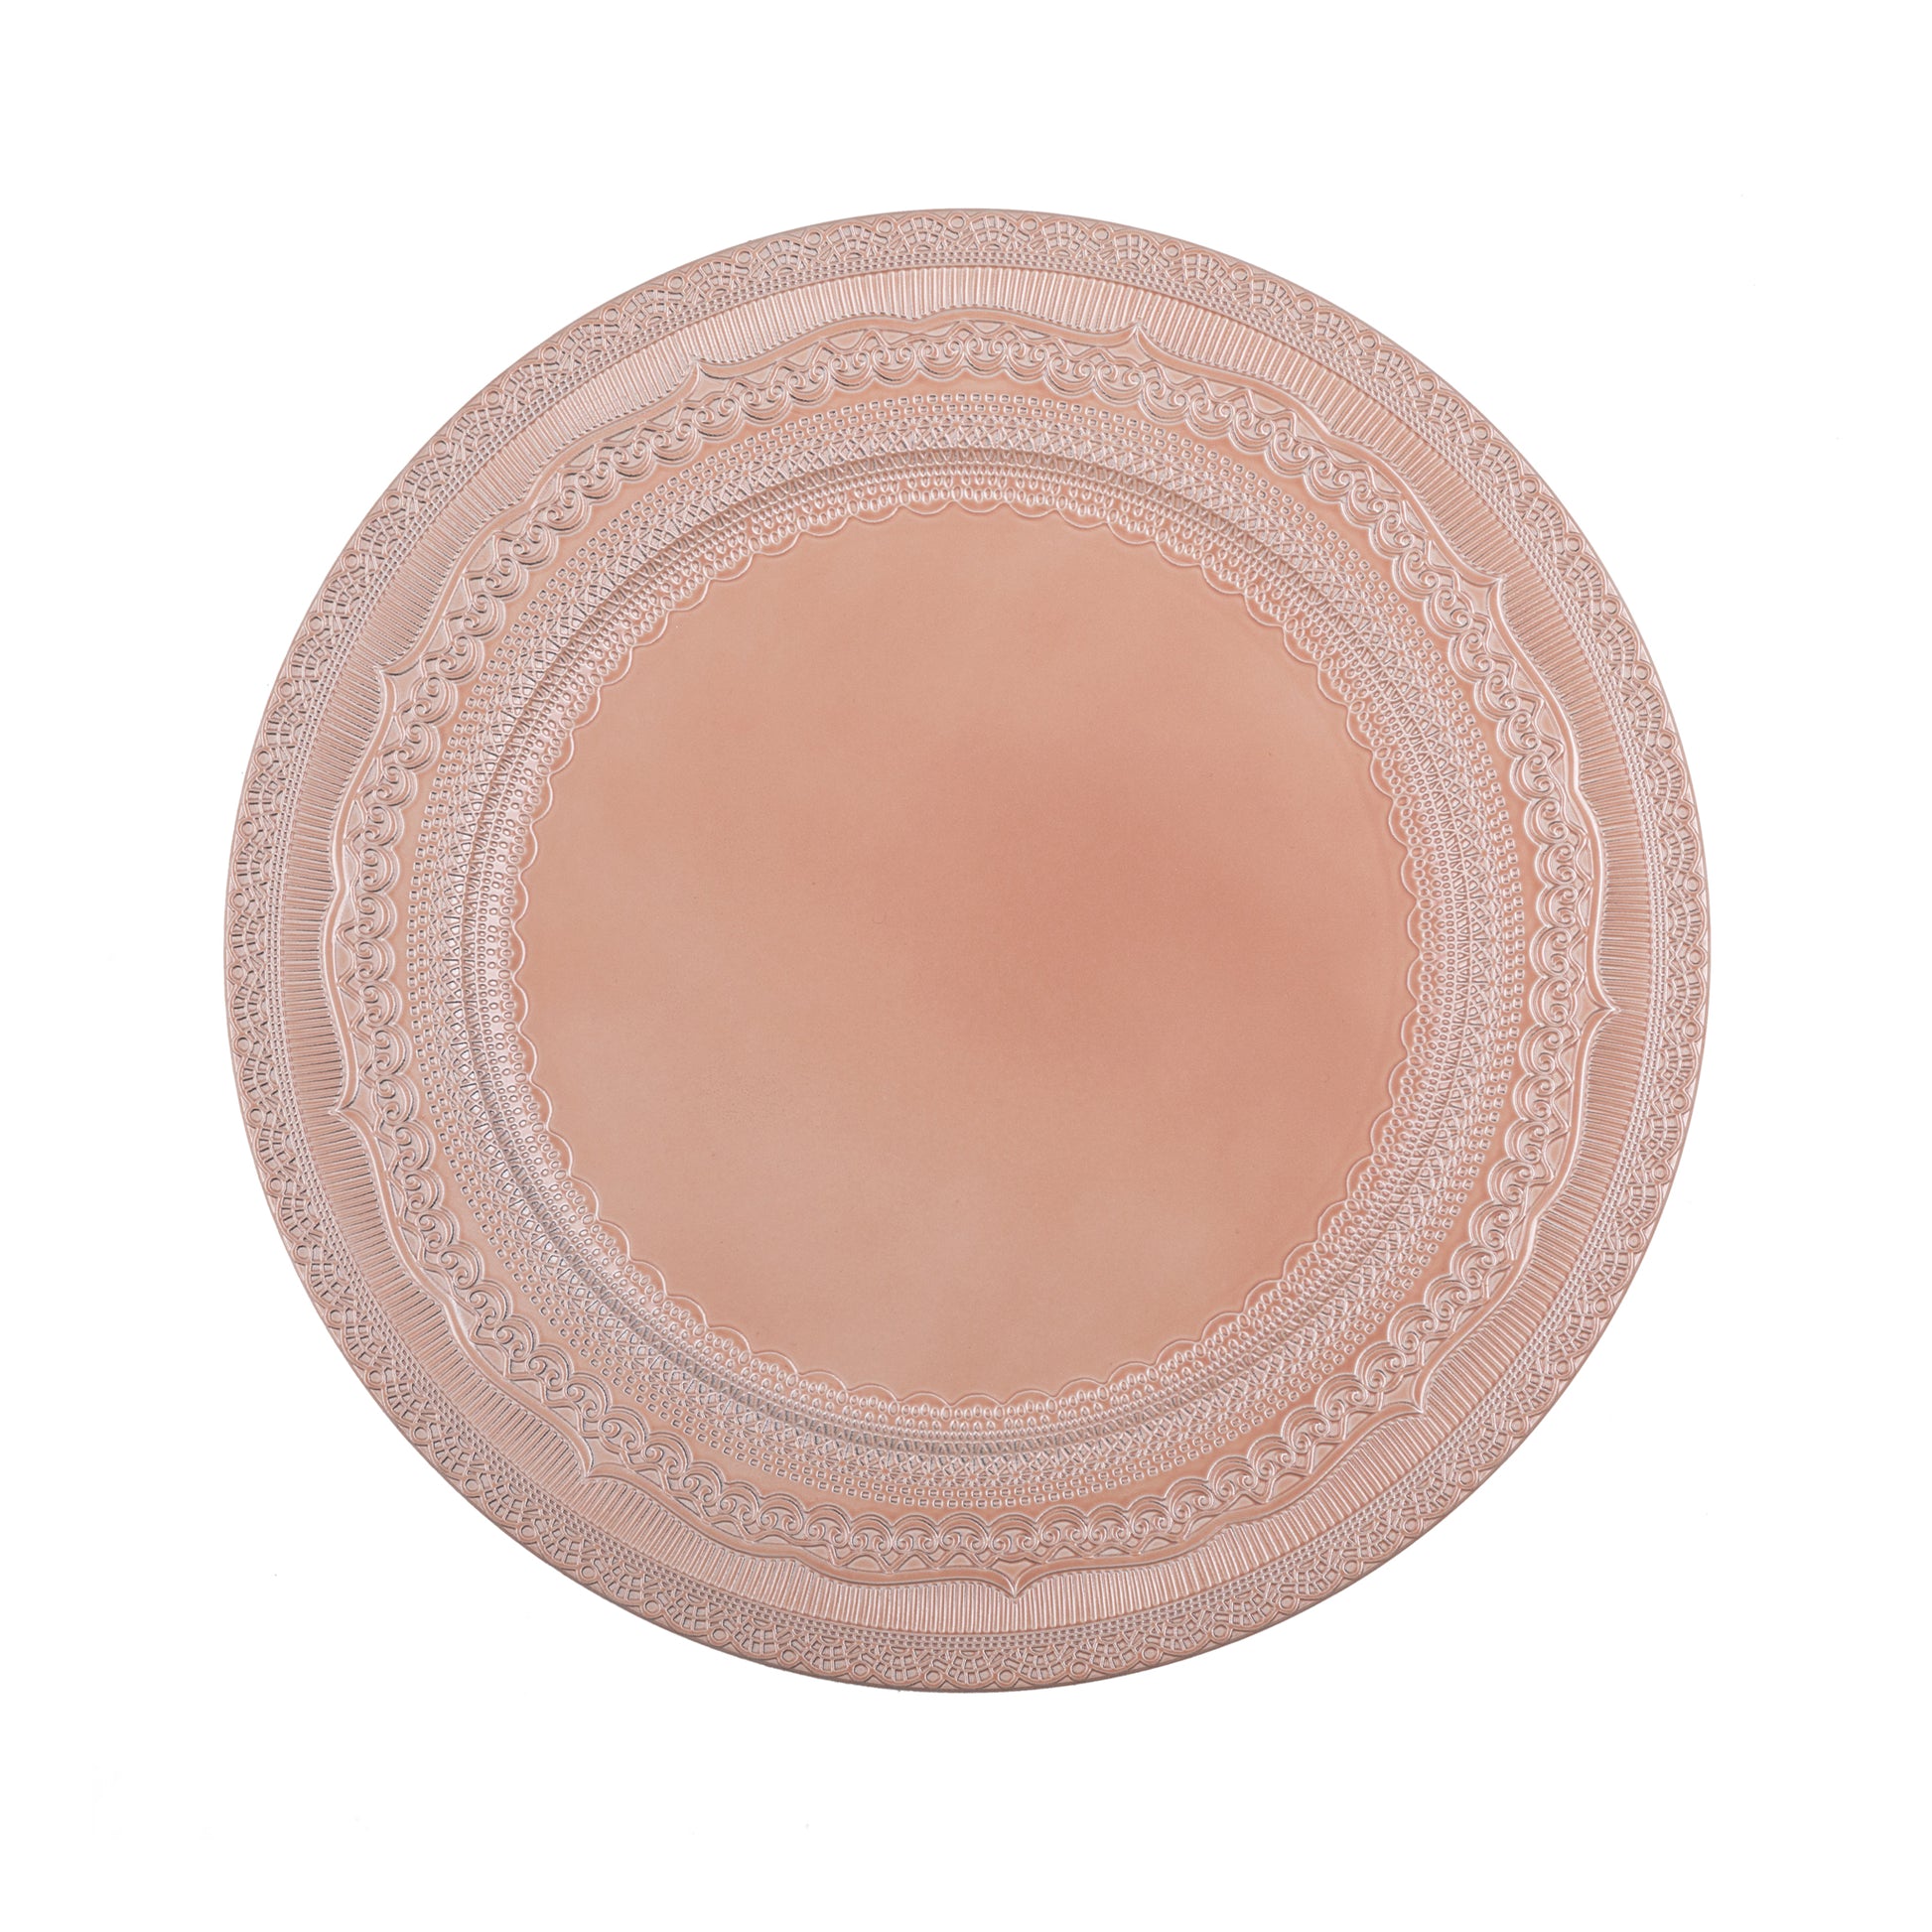 Lace Embossed Acrylic Plastic Charger Plate - Blush